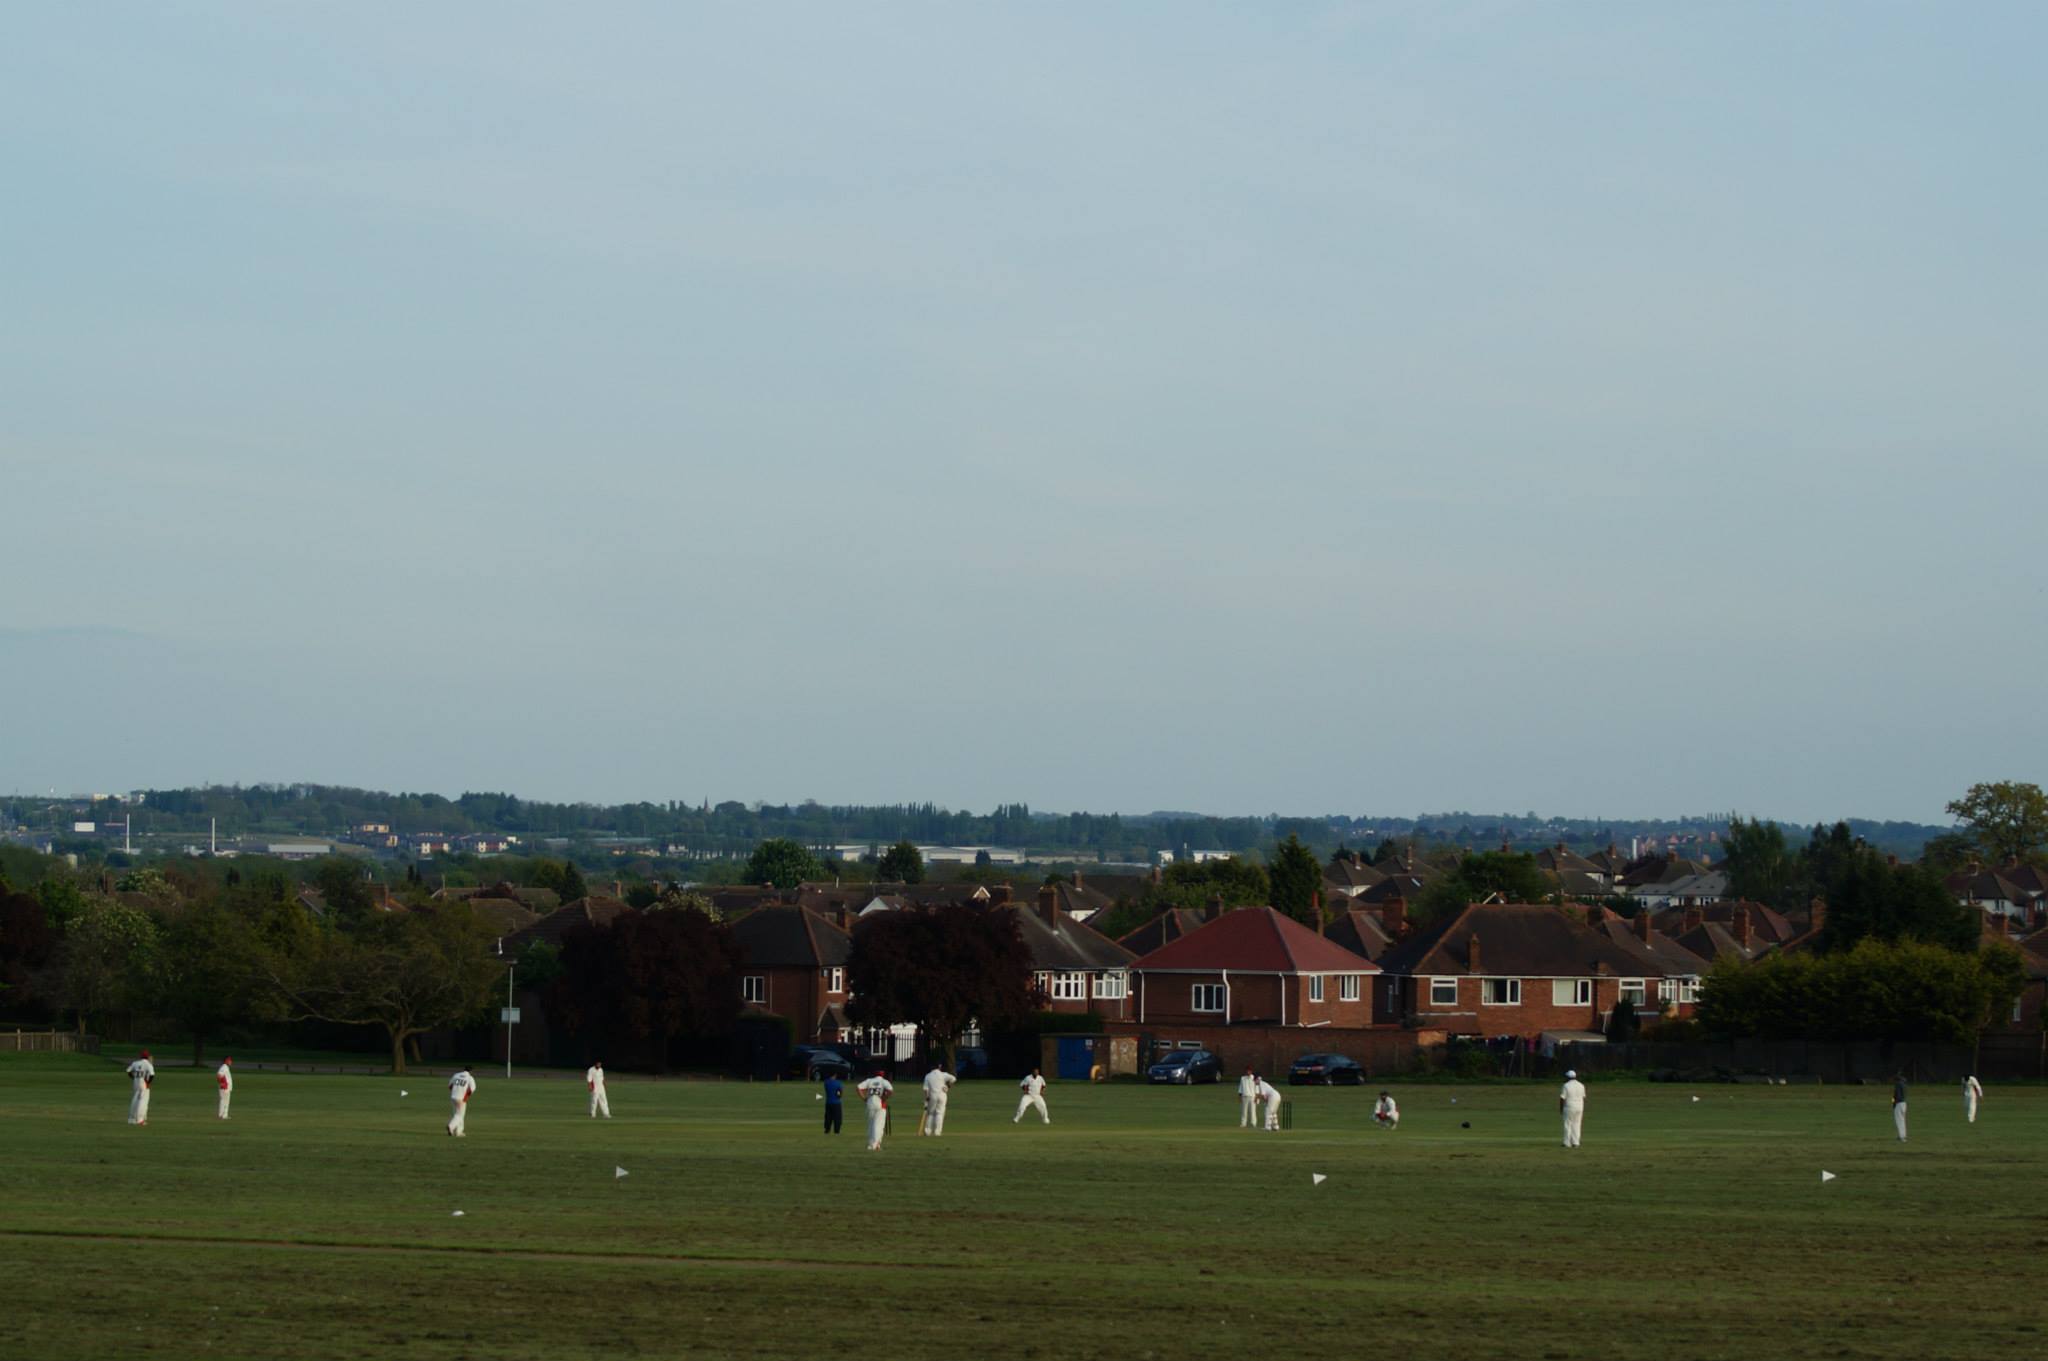 Cricket Grounds of Leicestershire